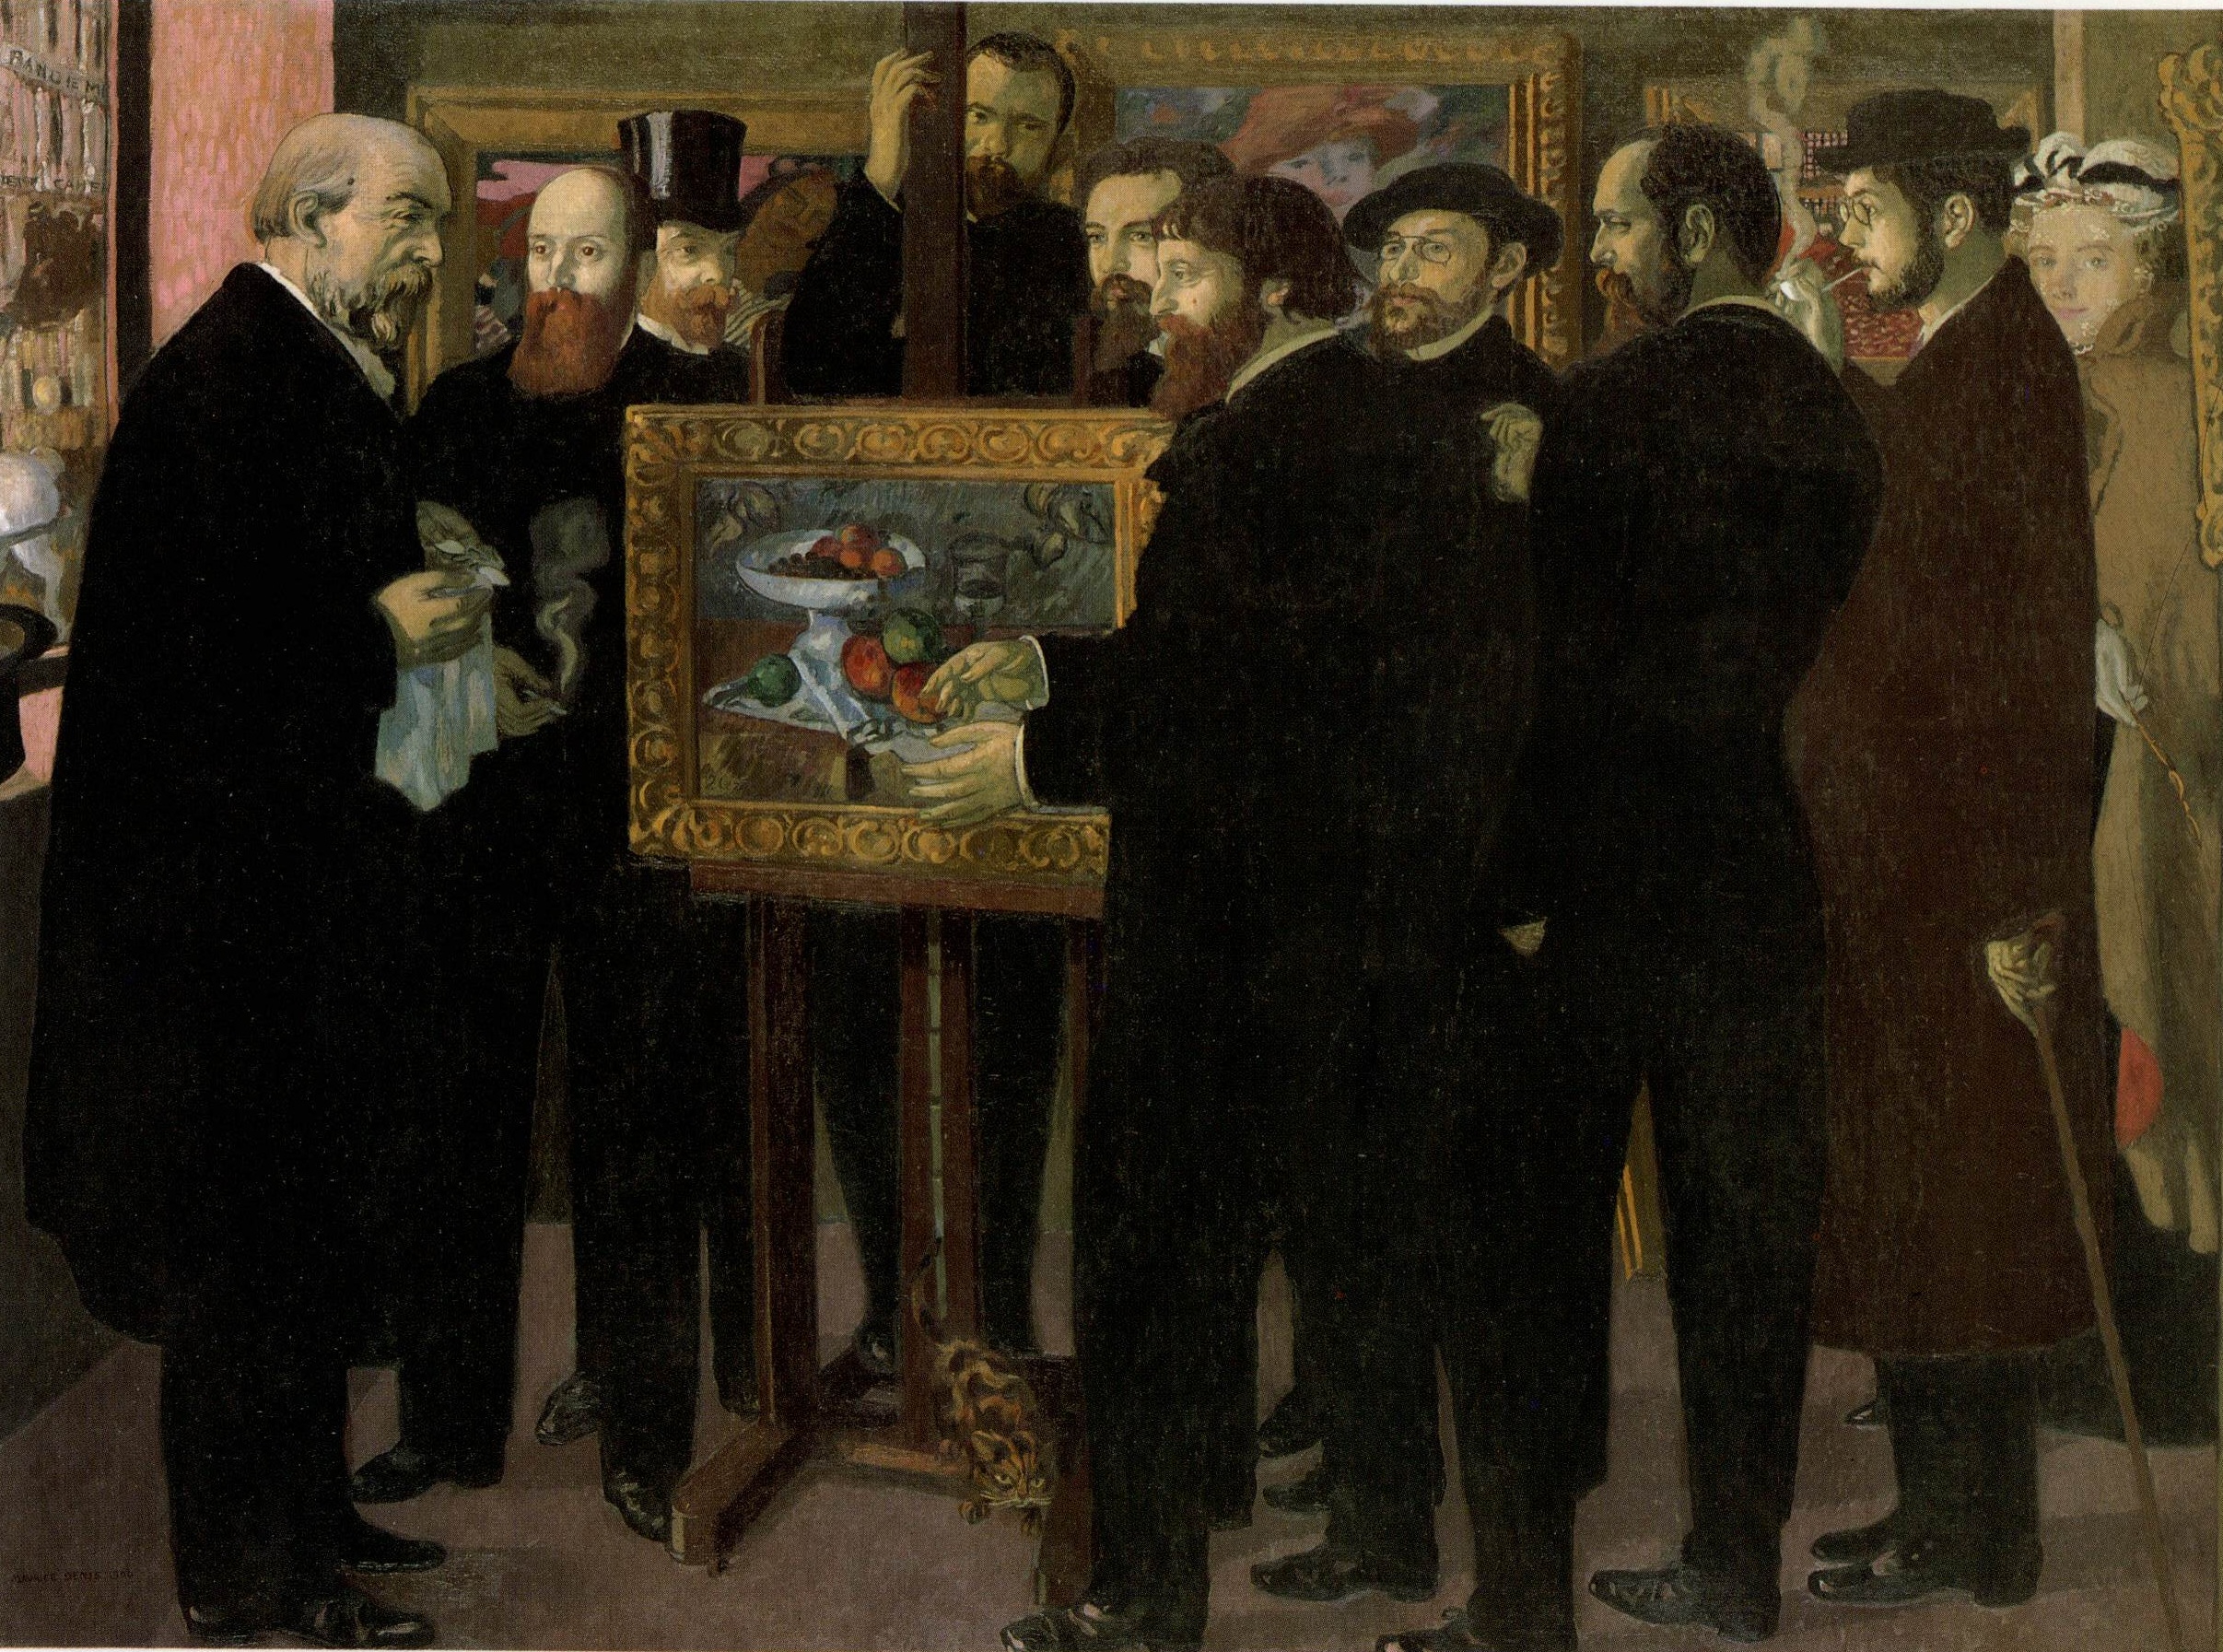 Omaggio a Cézanne by Maurice Denis - 1900 - 180 x 240 cm Musée d'Orsay